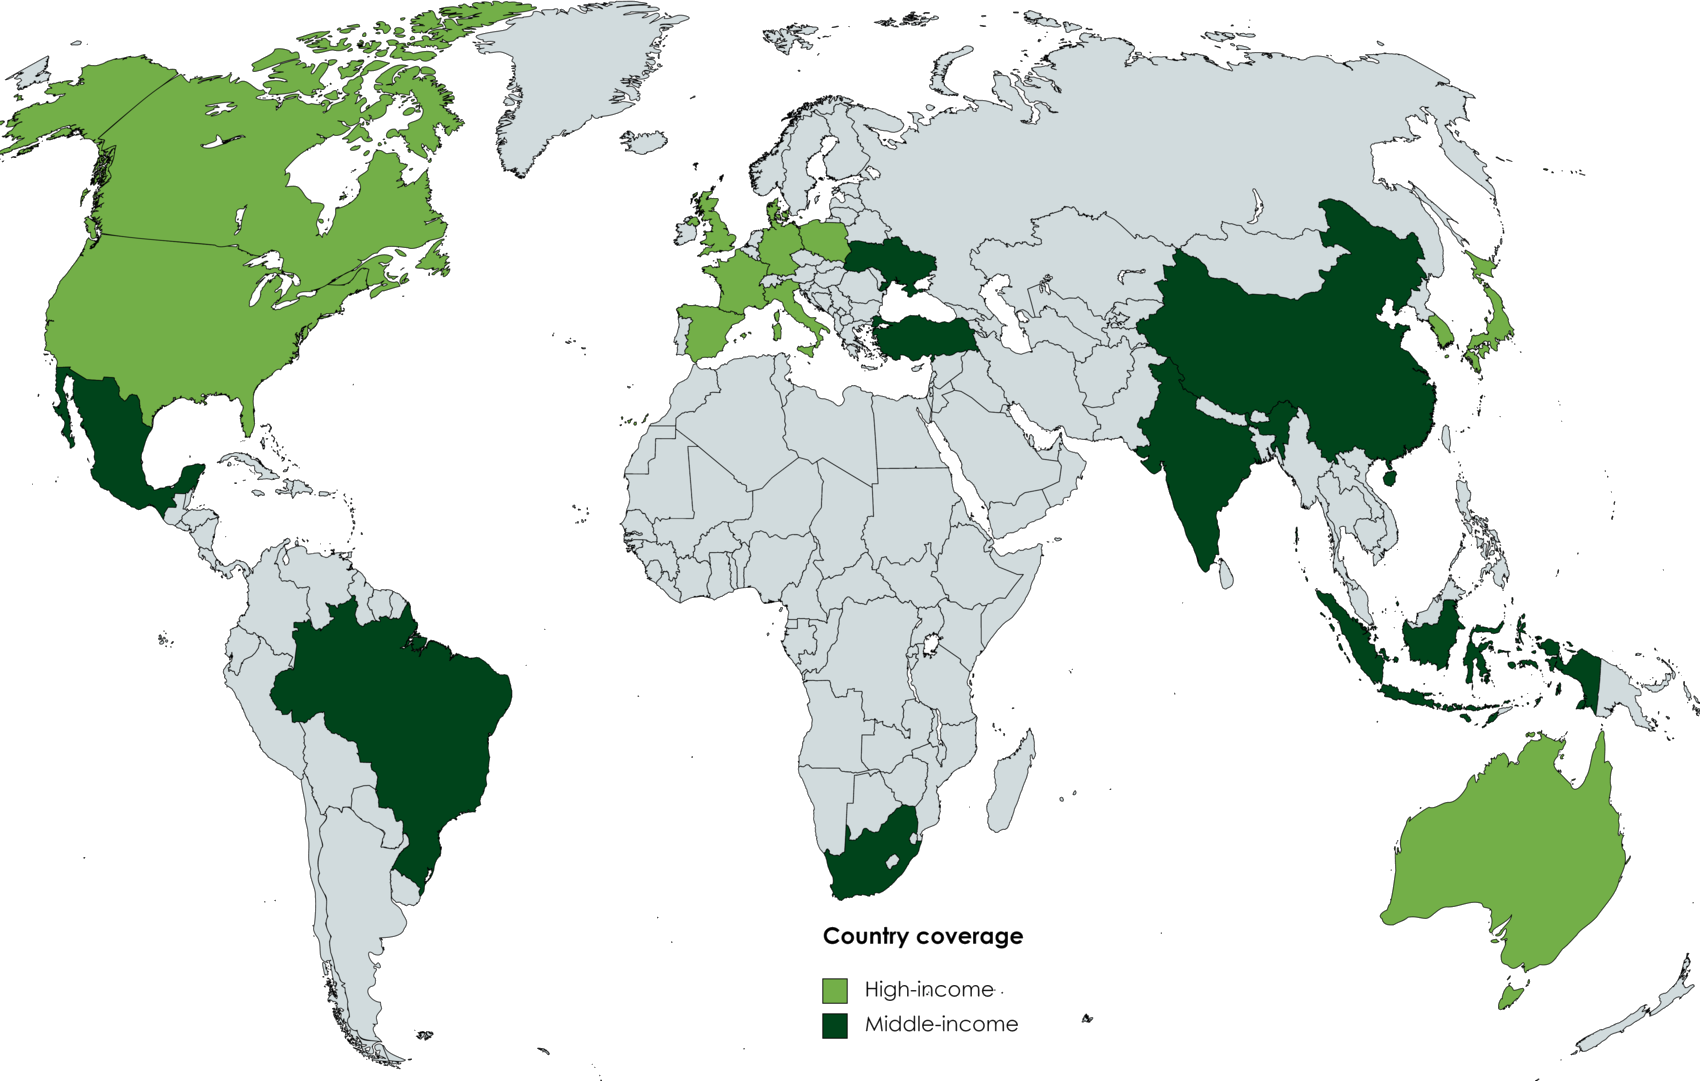 Countries covered by the study